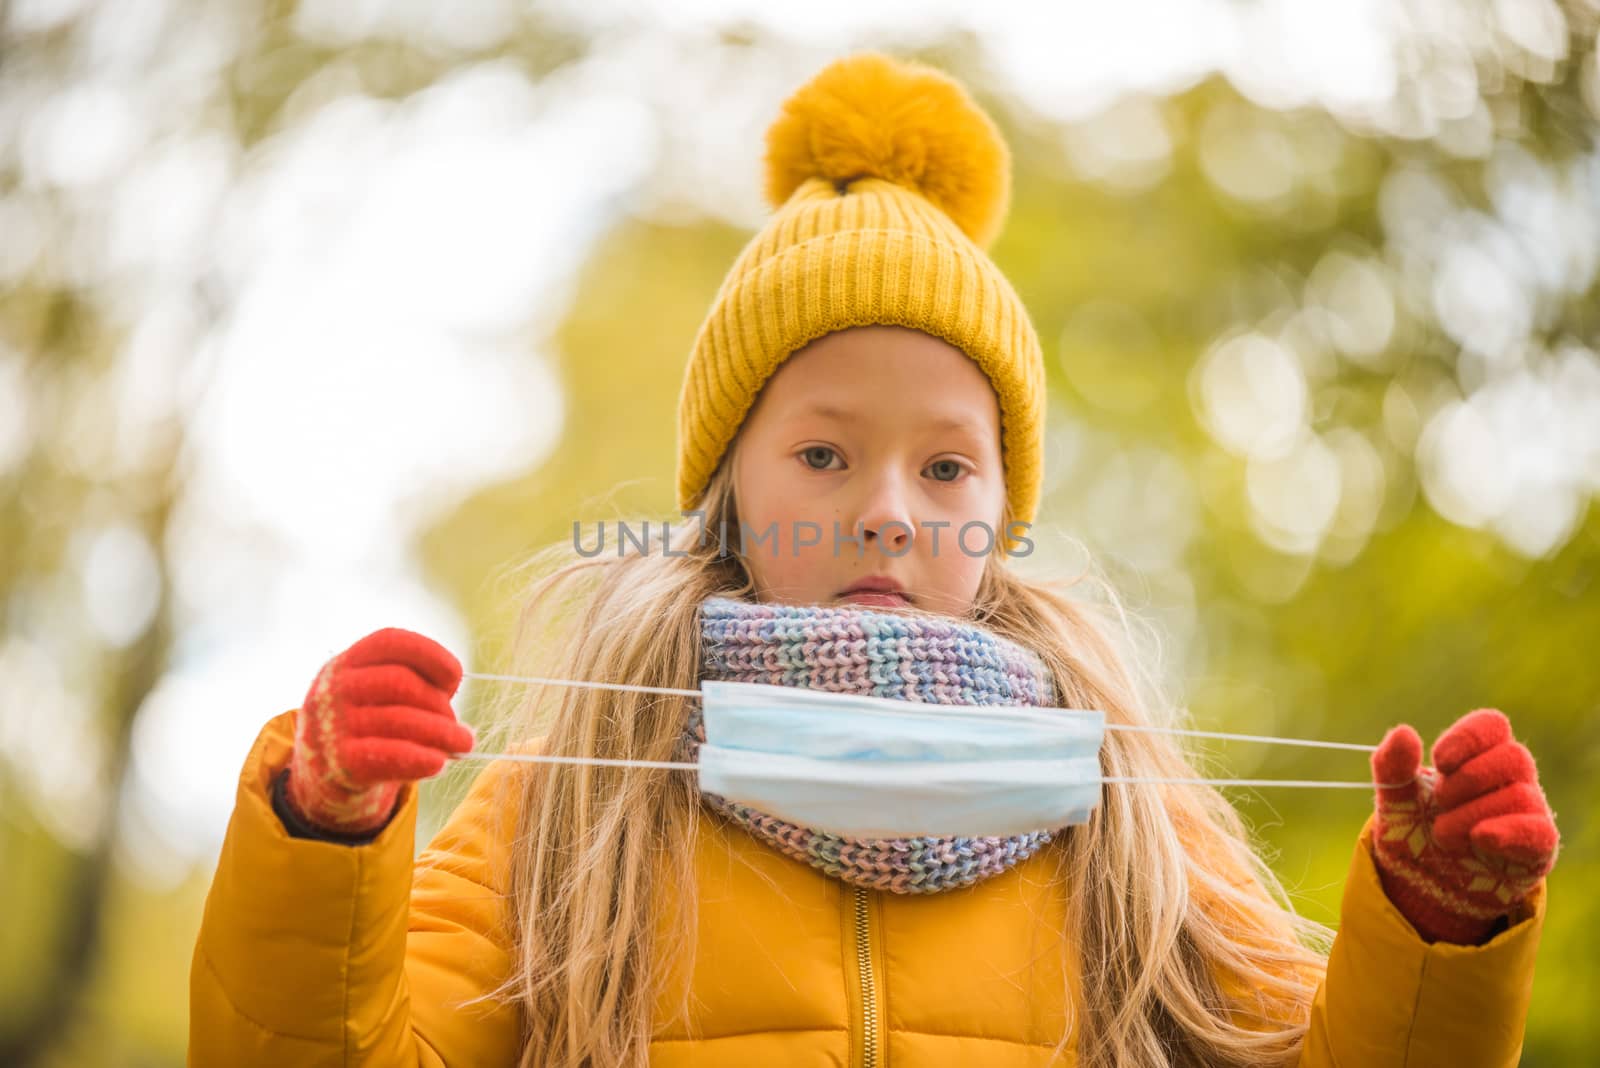 Little girl with blond hair wearing respirator mask in autumn background in yellow clothing